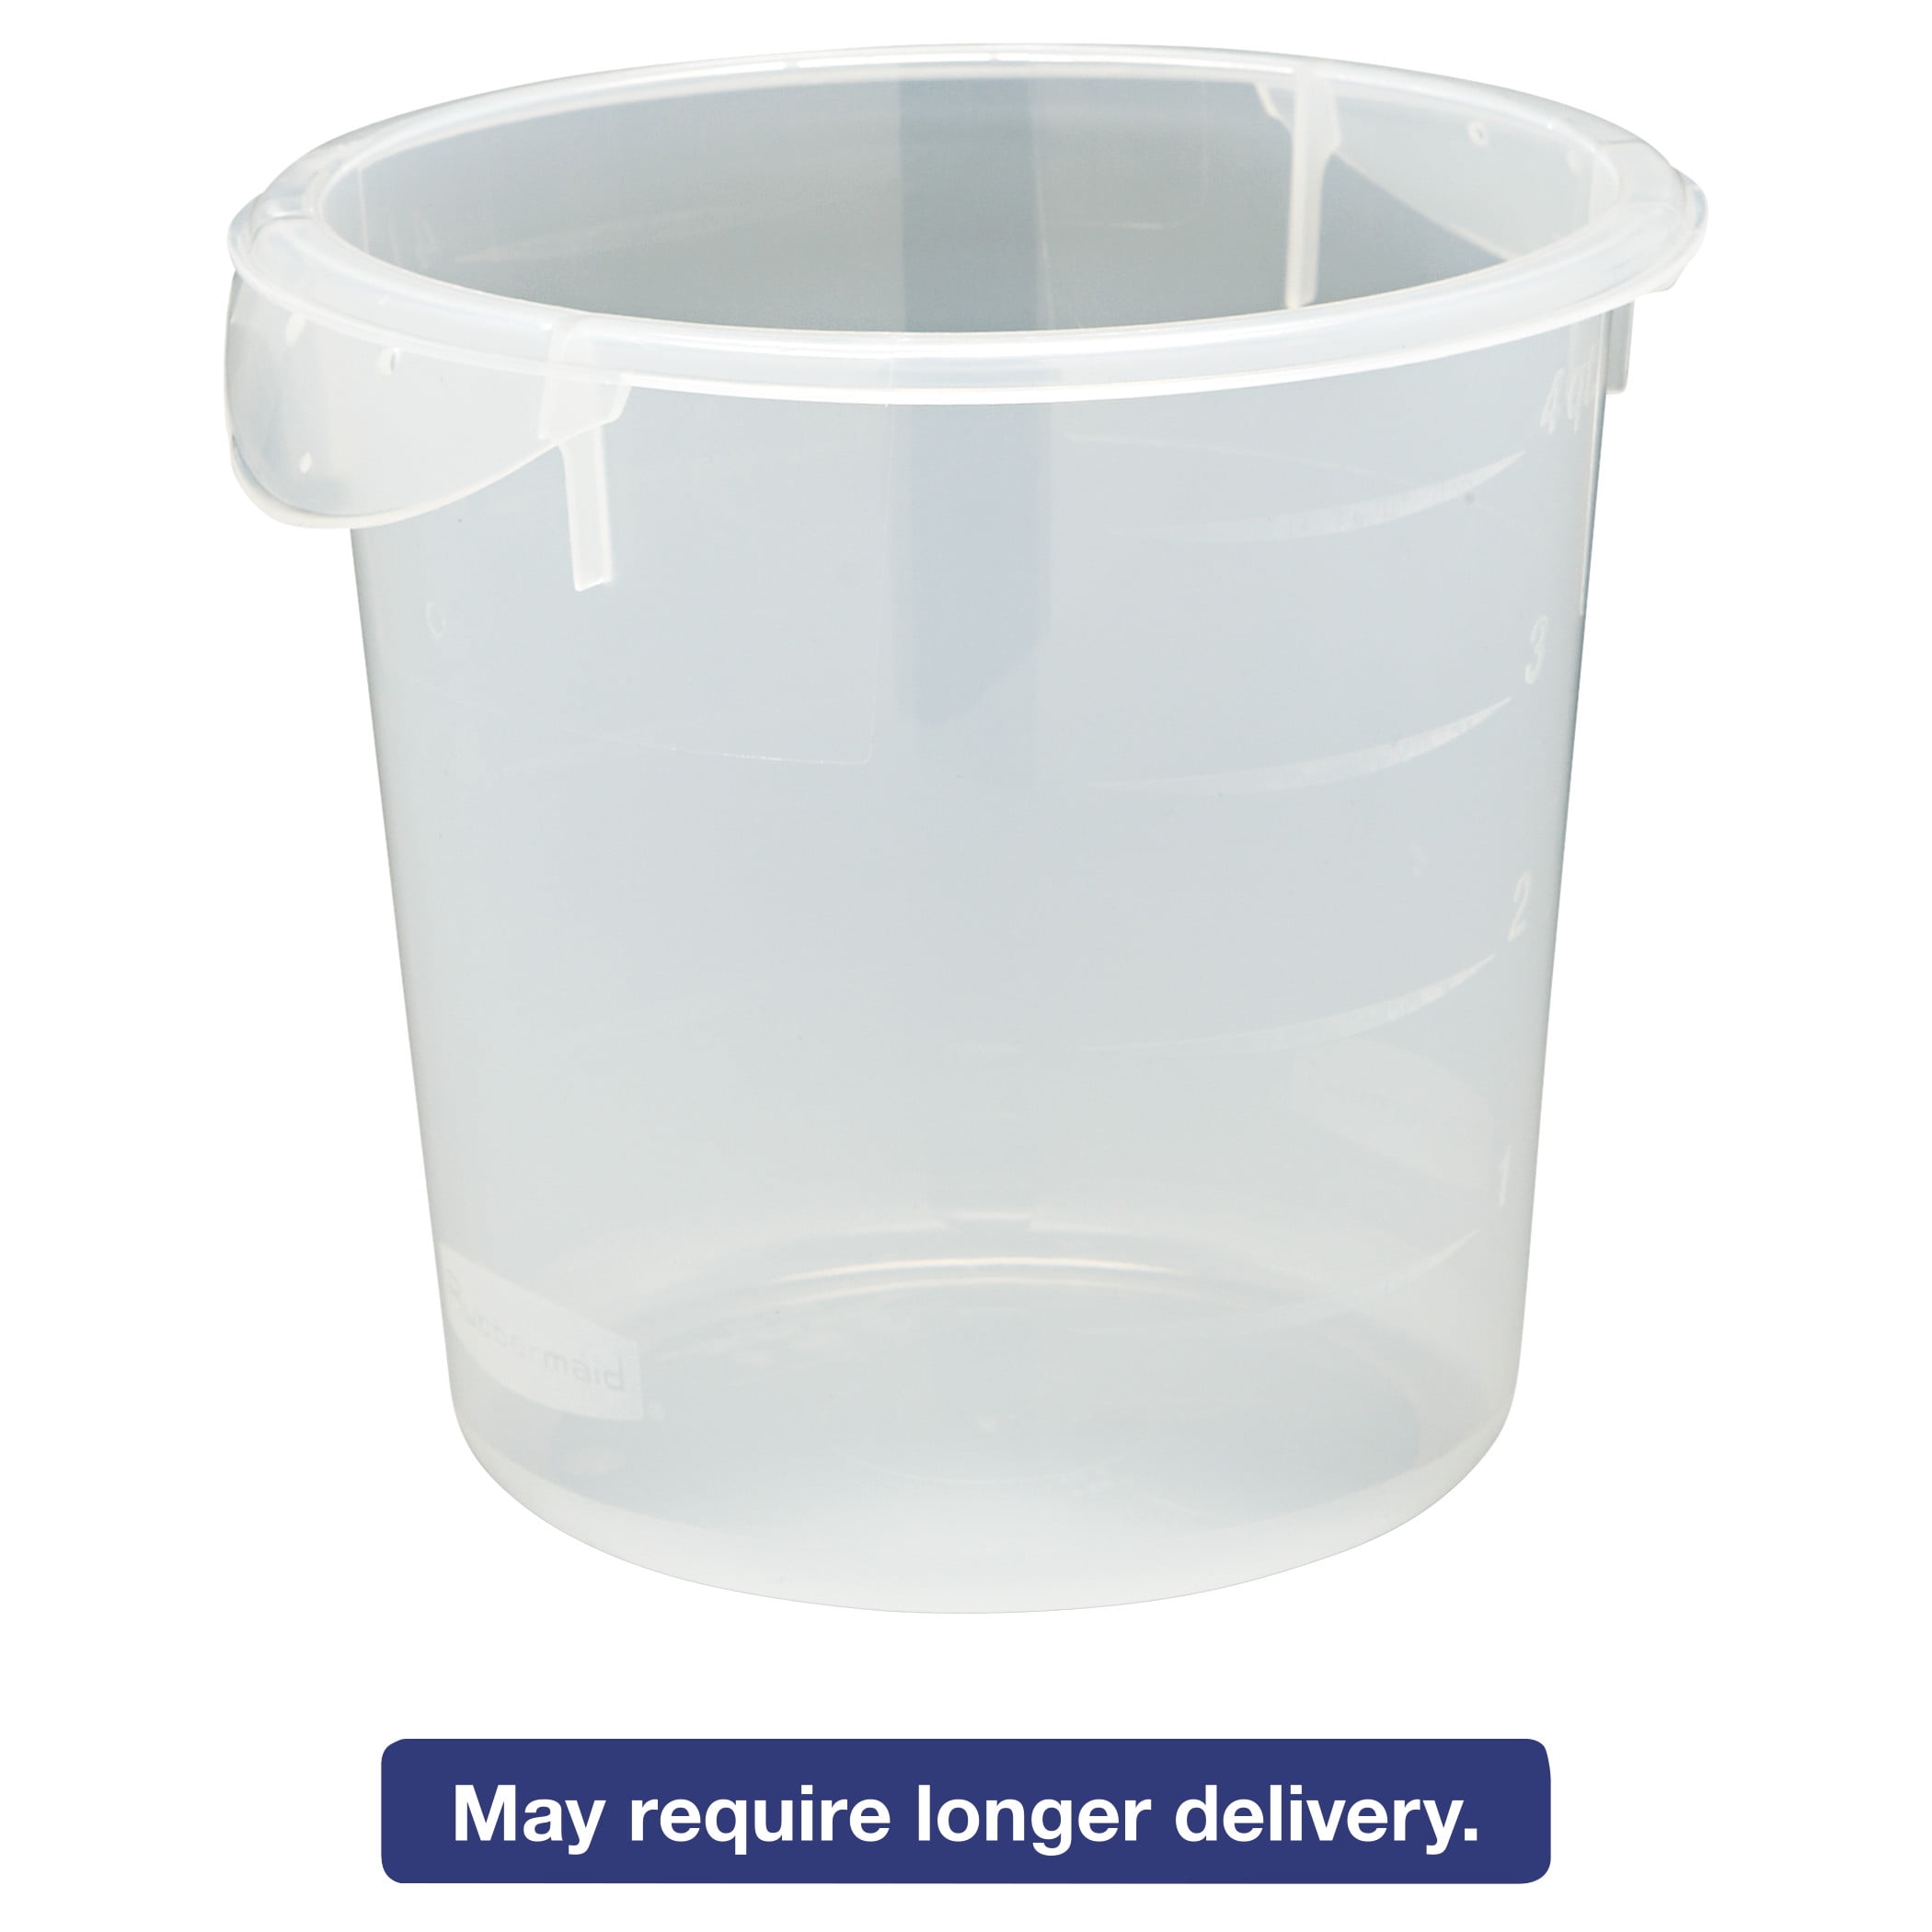 Rubbermaid 4 qt Round Clear Plastic Container - 8 1/2Dia x 7 3/4H